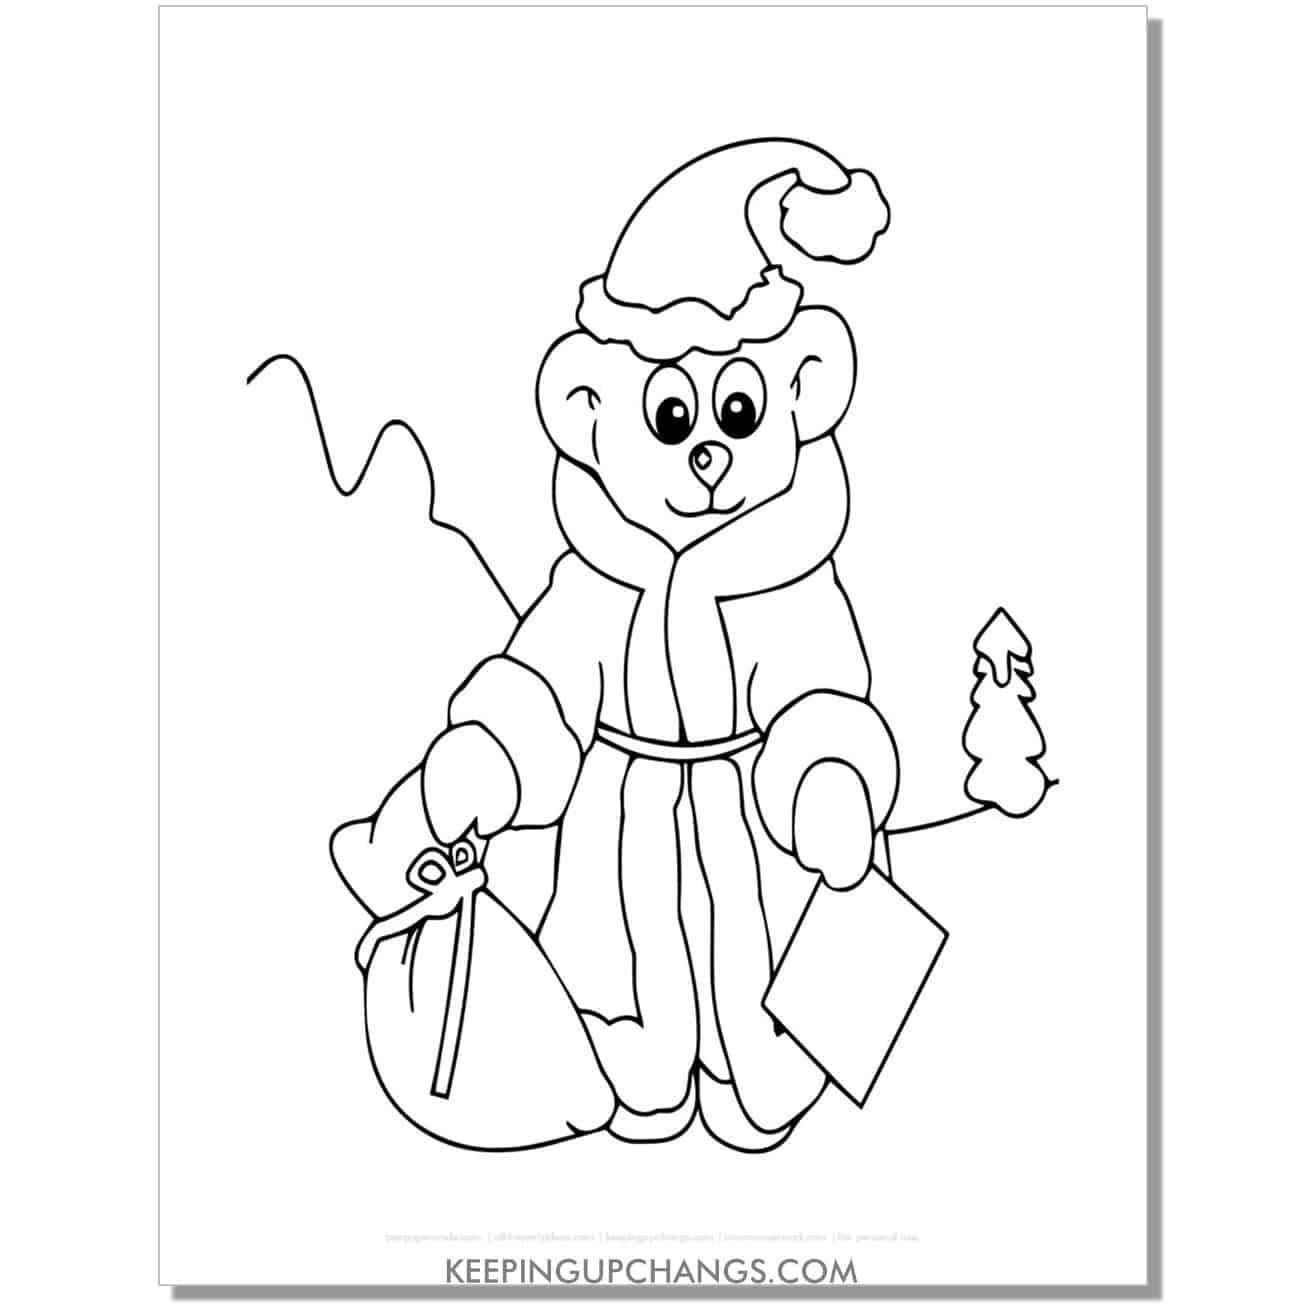 free freehand bear in santa suit christmas animal coloring page.